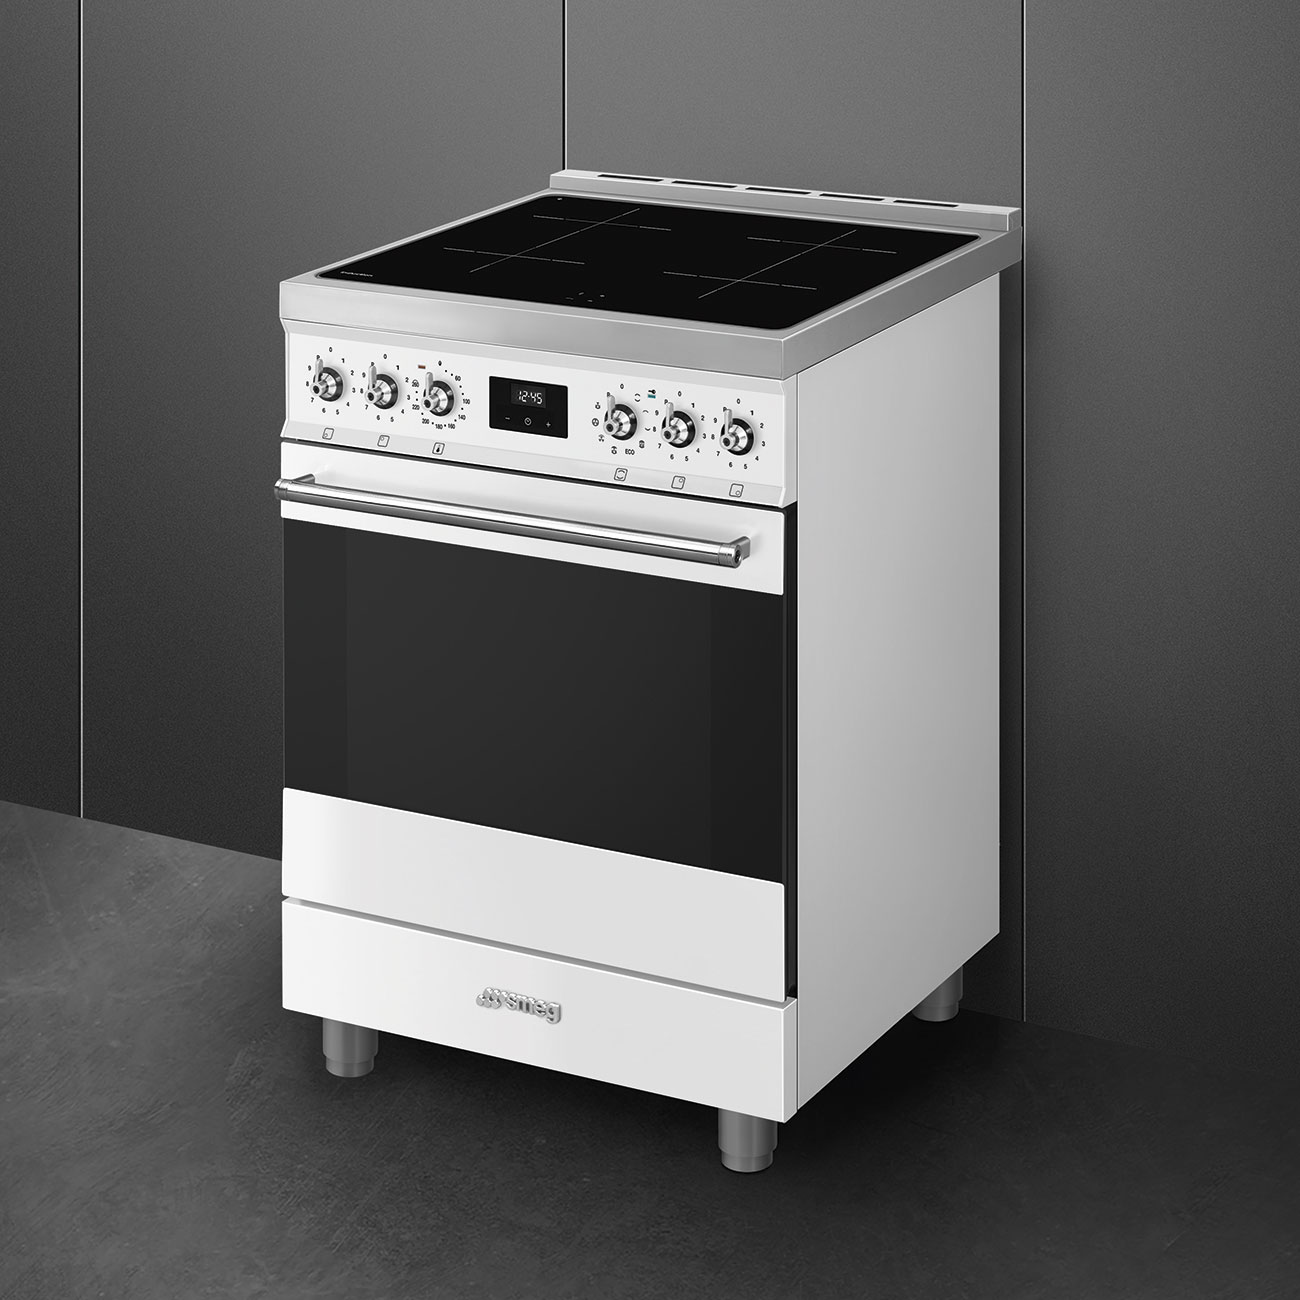 Smeg White Cooker with Induction Hob_4